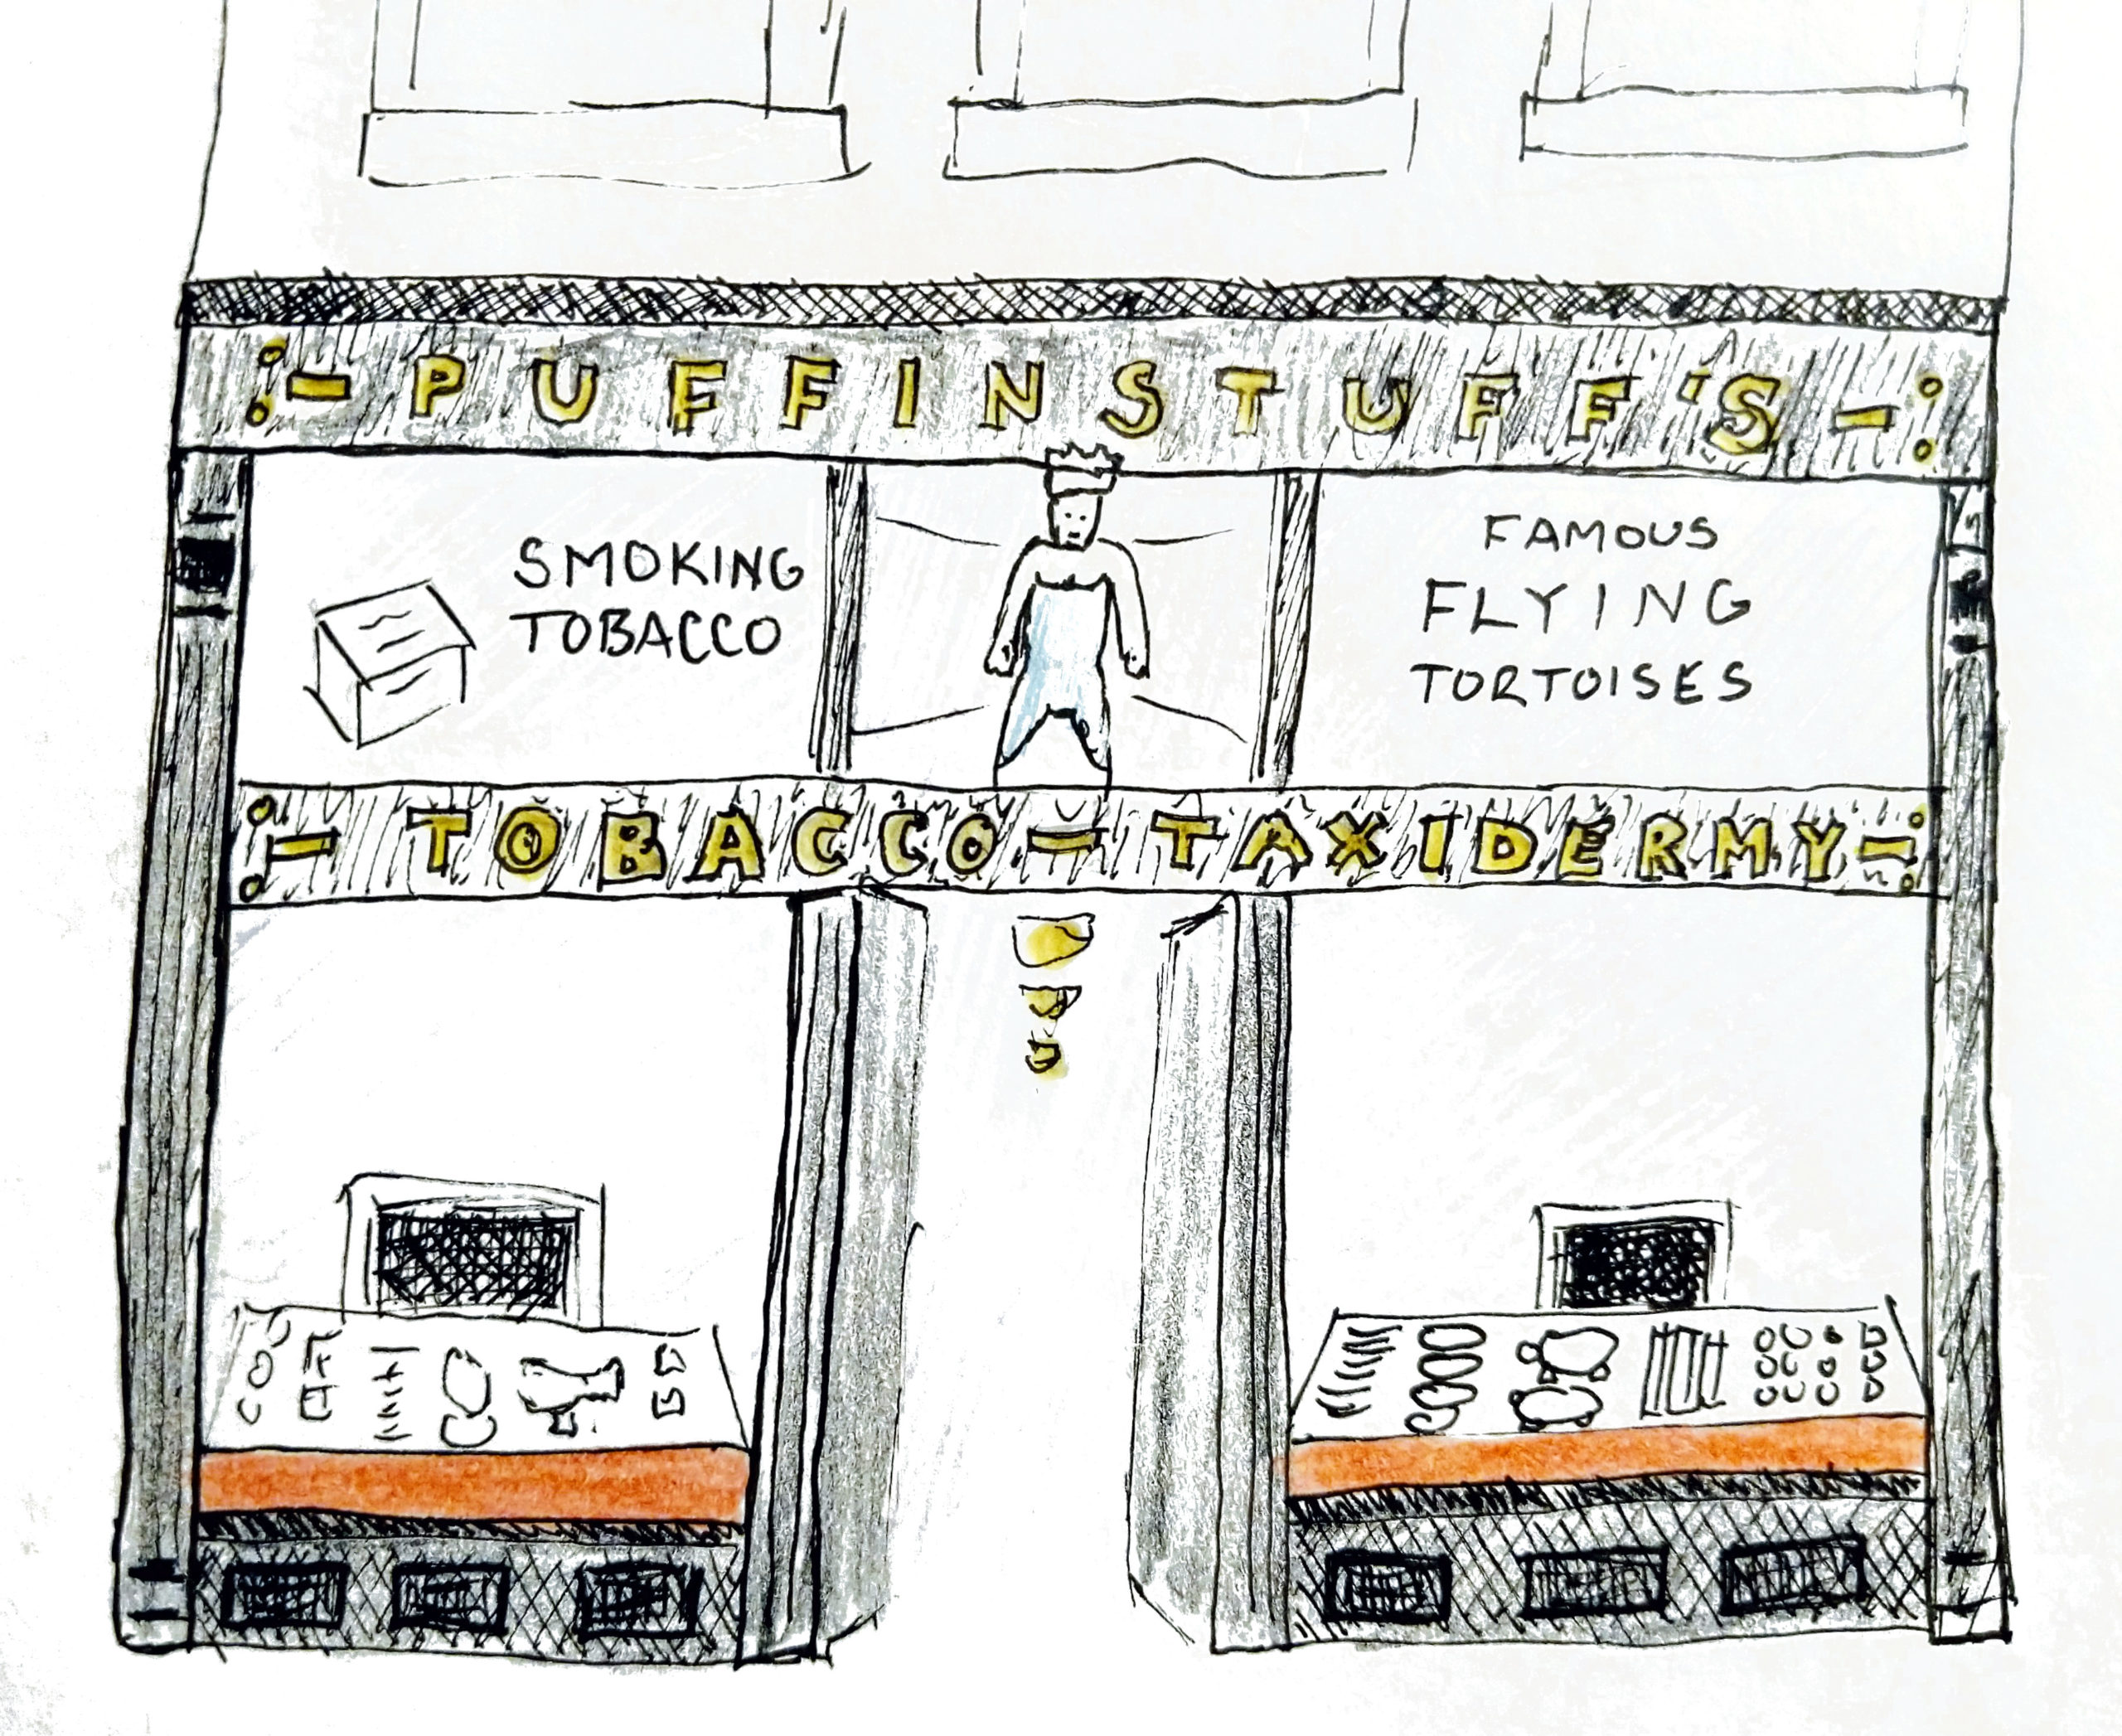 drawing of shop exterior for Puffinstuff's Tobacco and Taxidermy